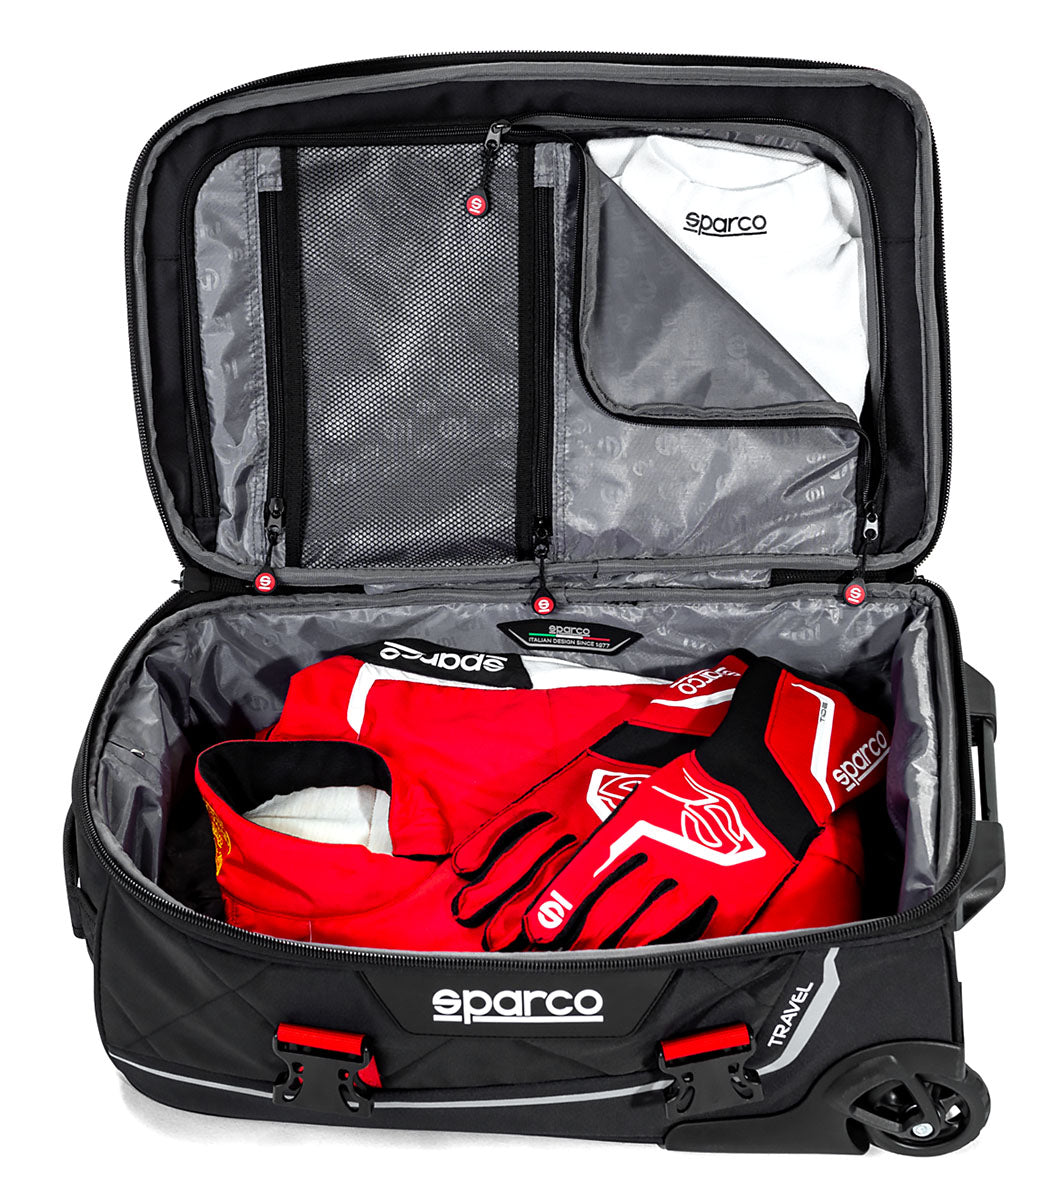 Sparco Travel Bag Black/Red Open image